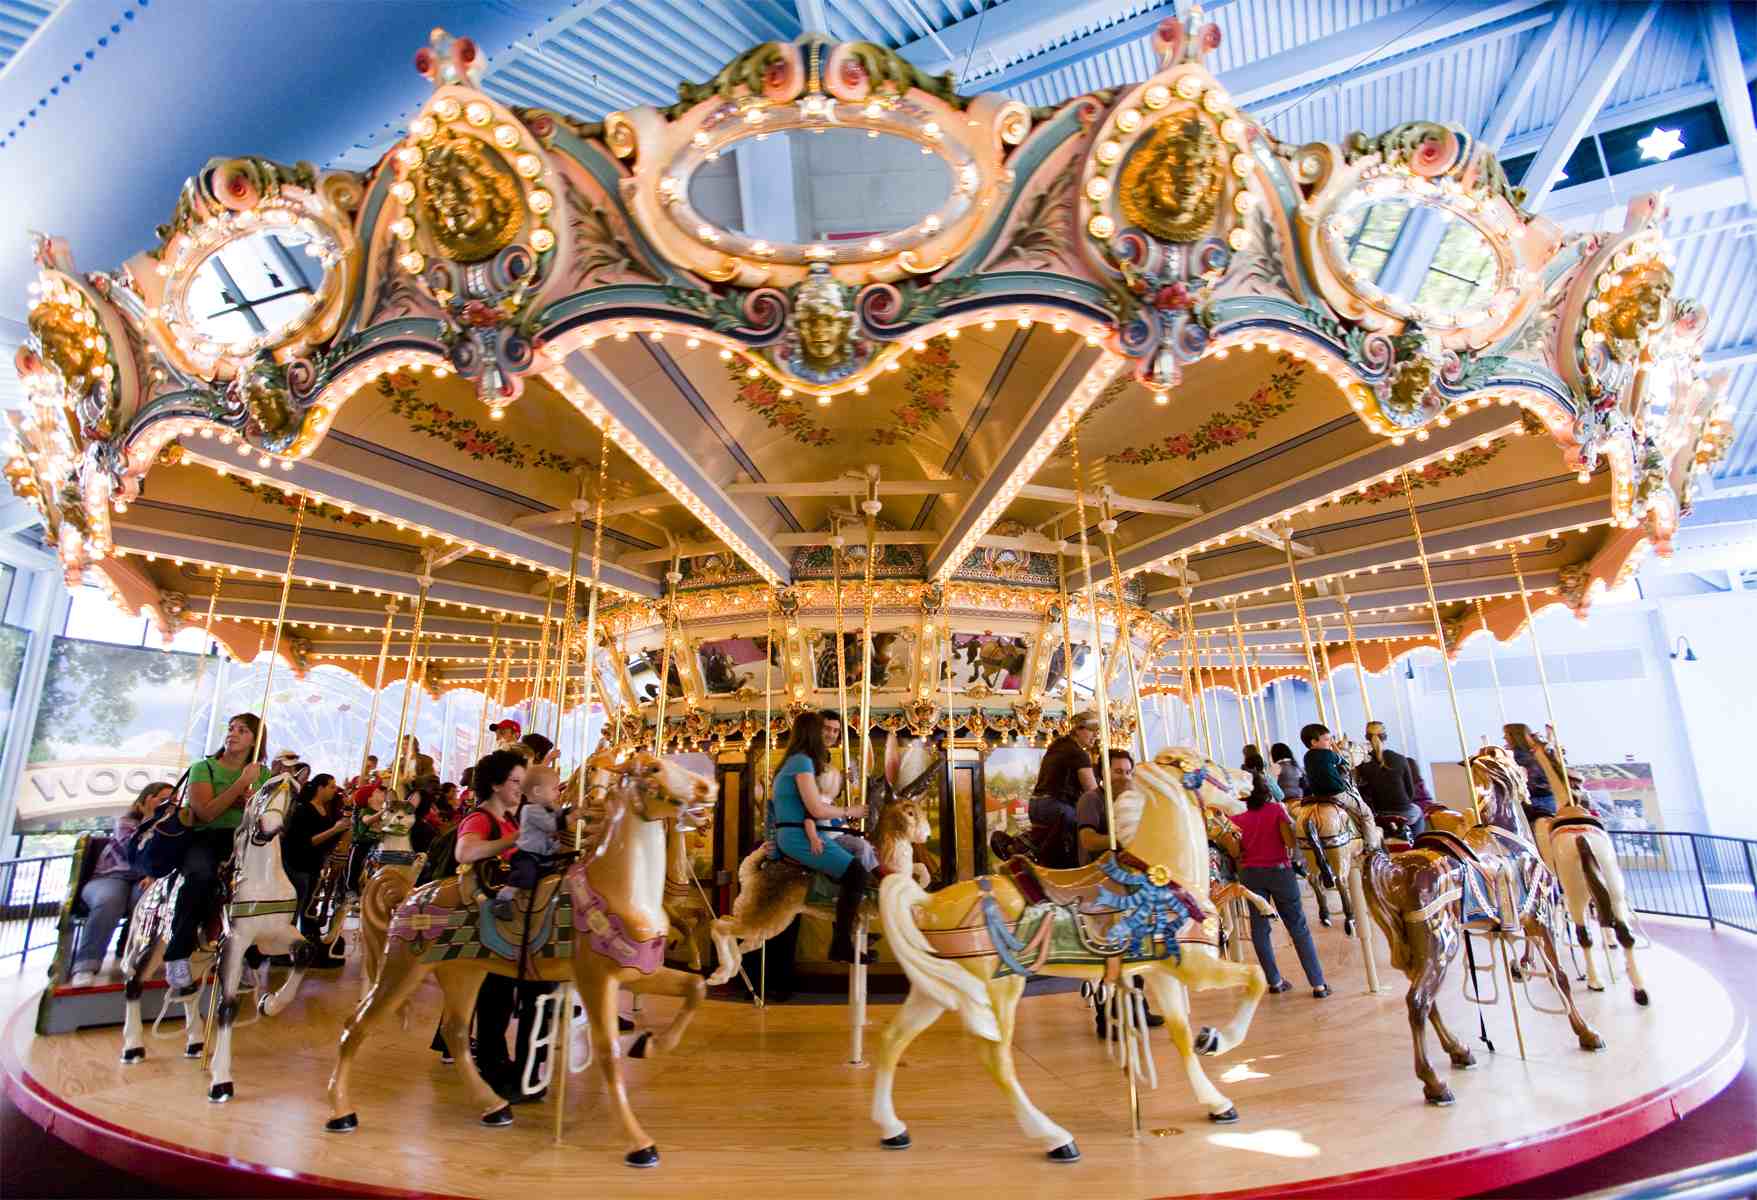 Images of Carousel | 1757x1200